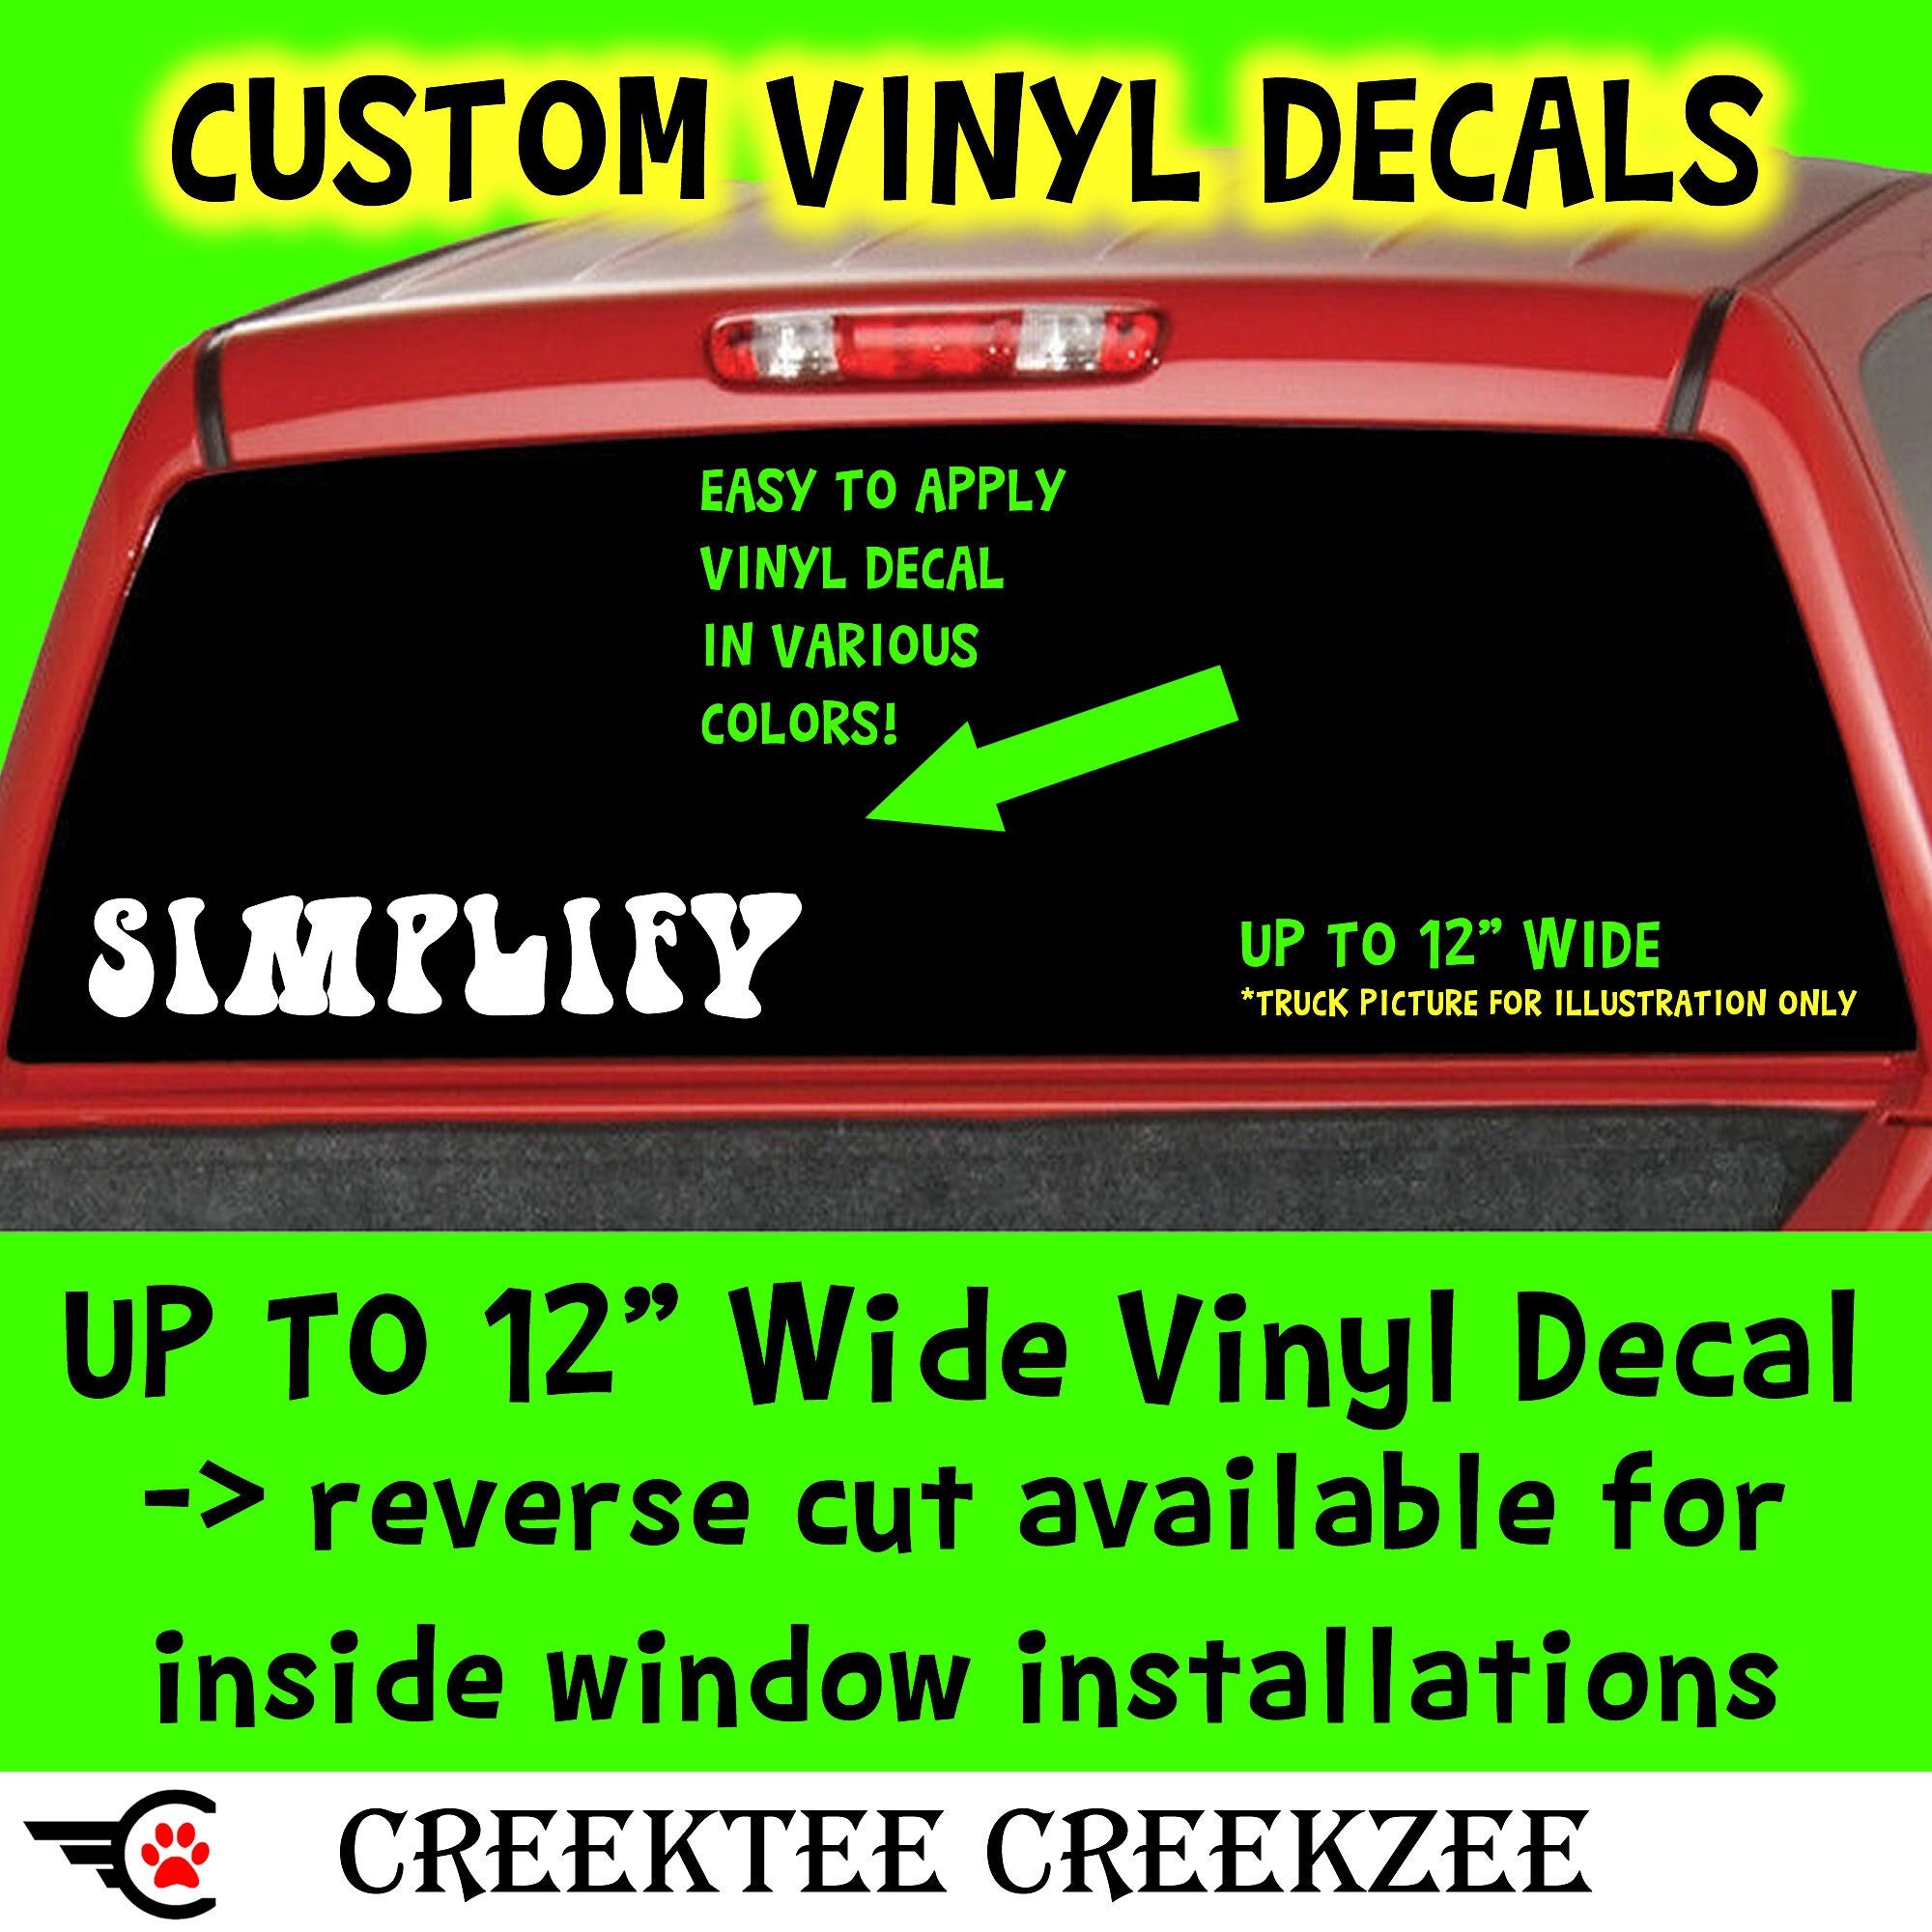 Simplify in Color Vinyl Decal Various Sizes and Colors Die Cut Vinyl Decal also in Cool Chrome Colors!